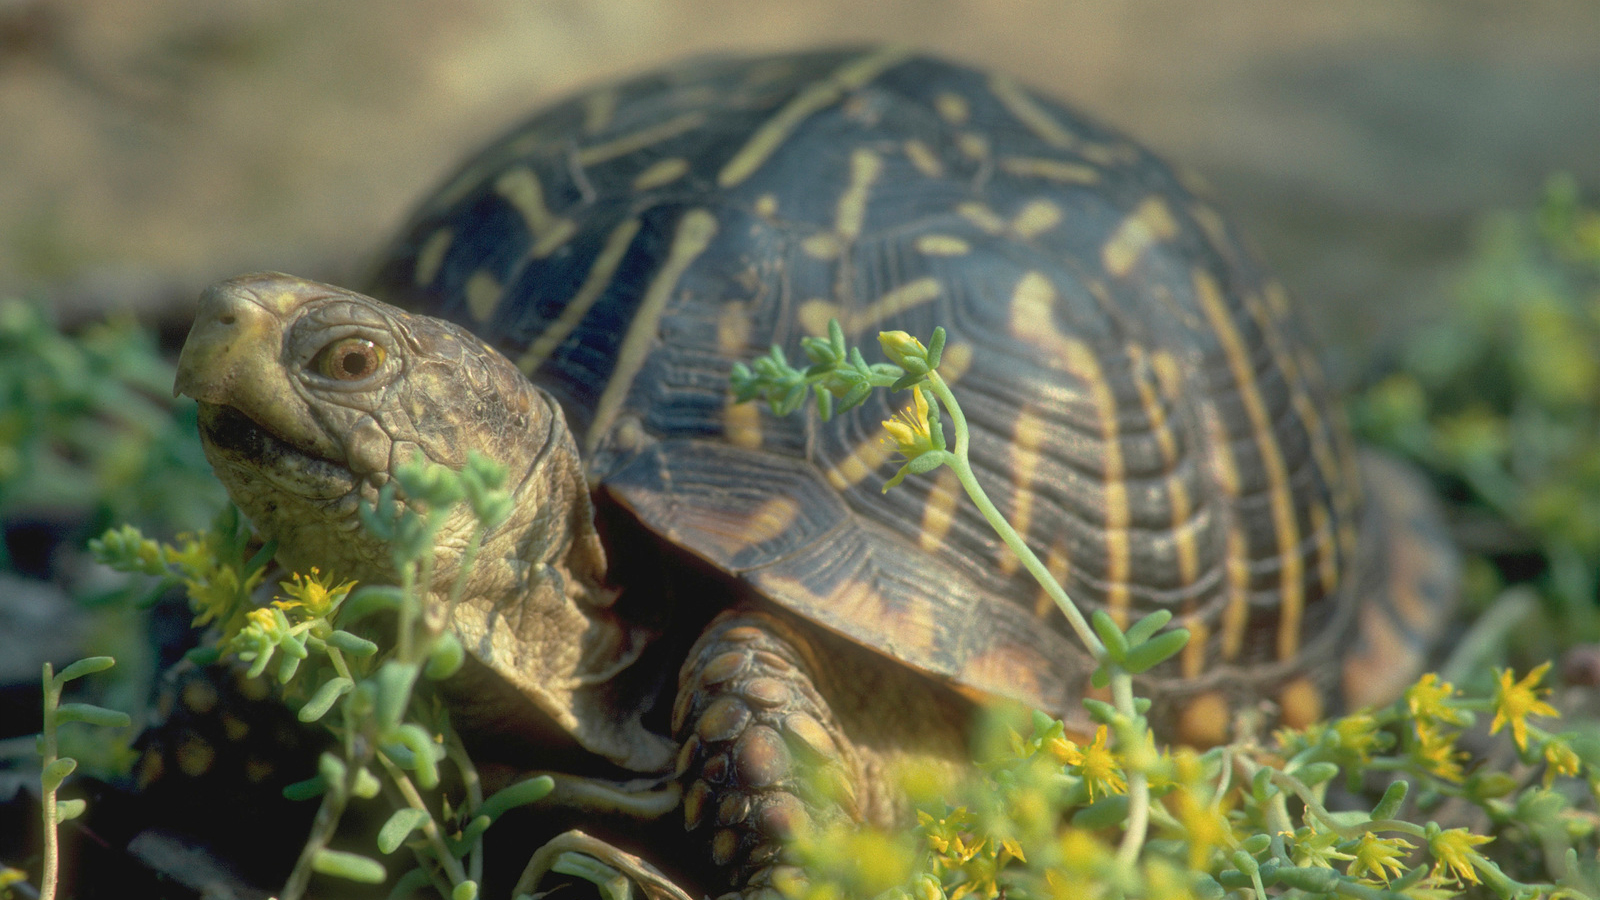 Ornate box turtle in Osage County of Oklahoma in United States, North America. Photo © Harvey Payne